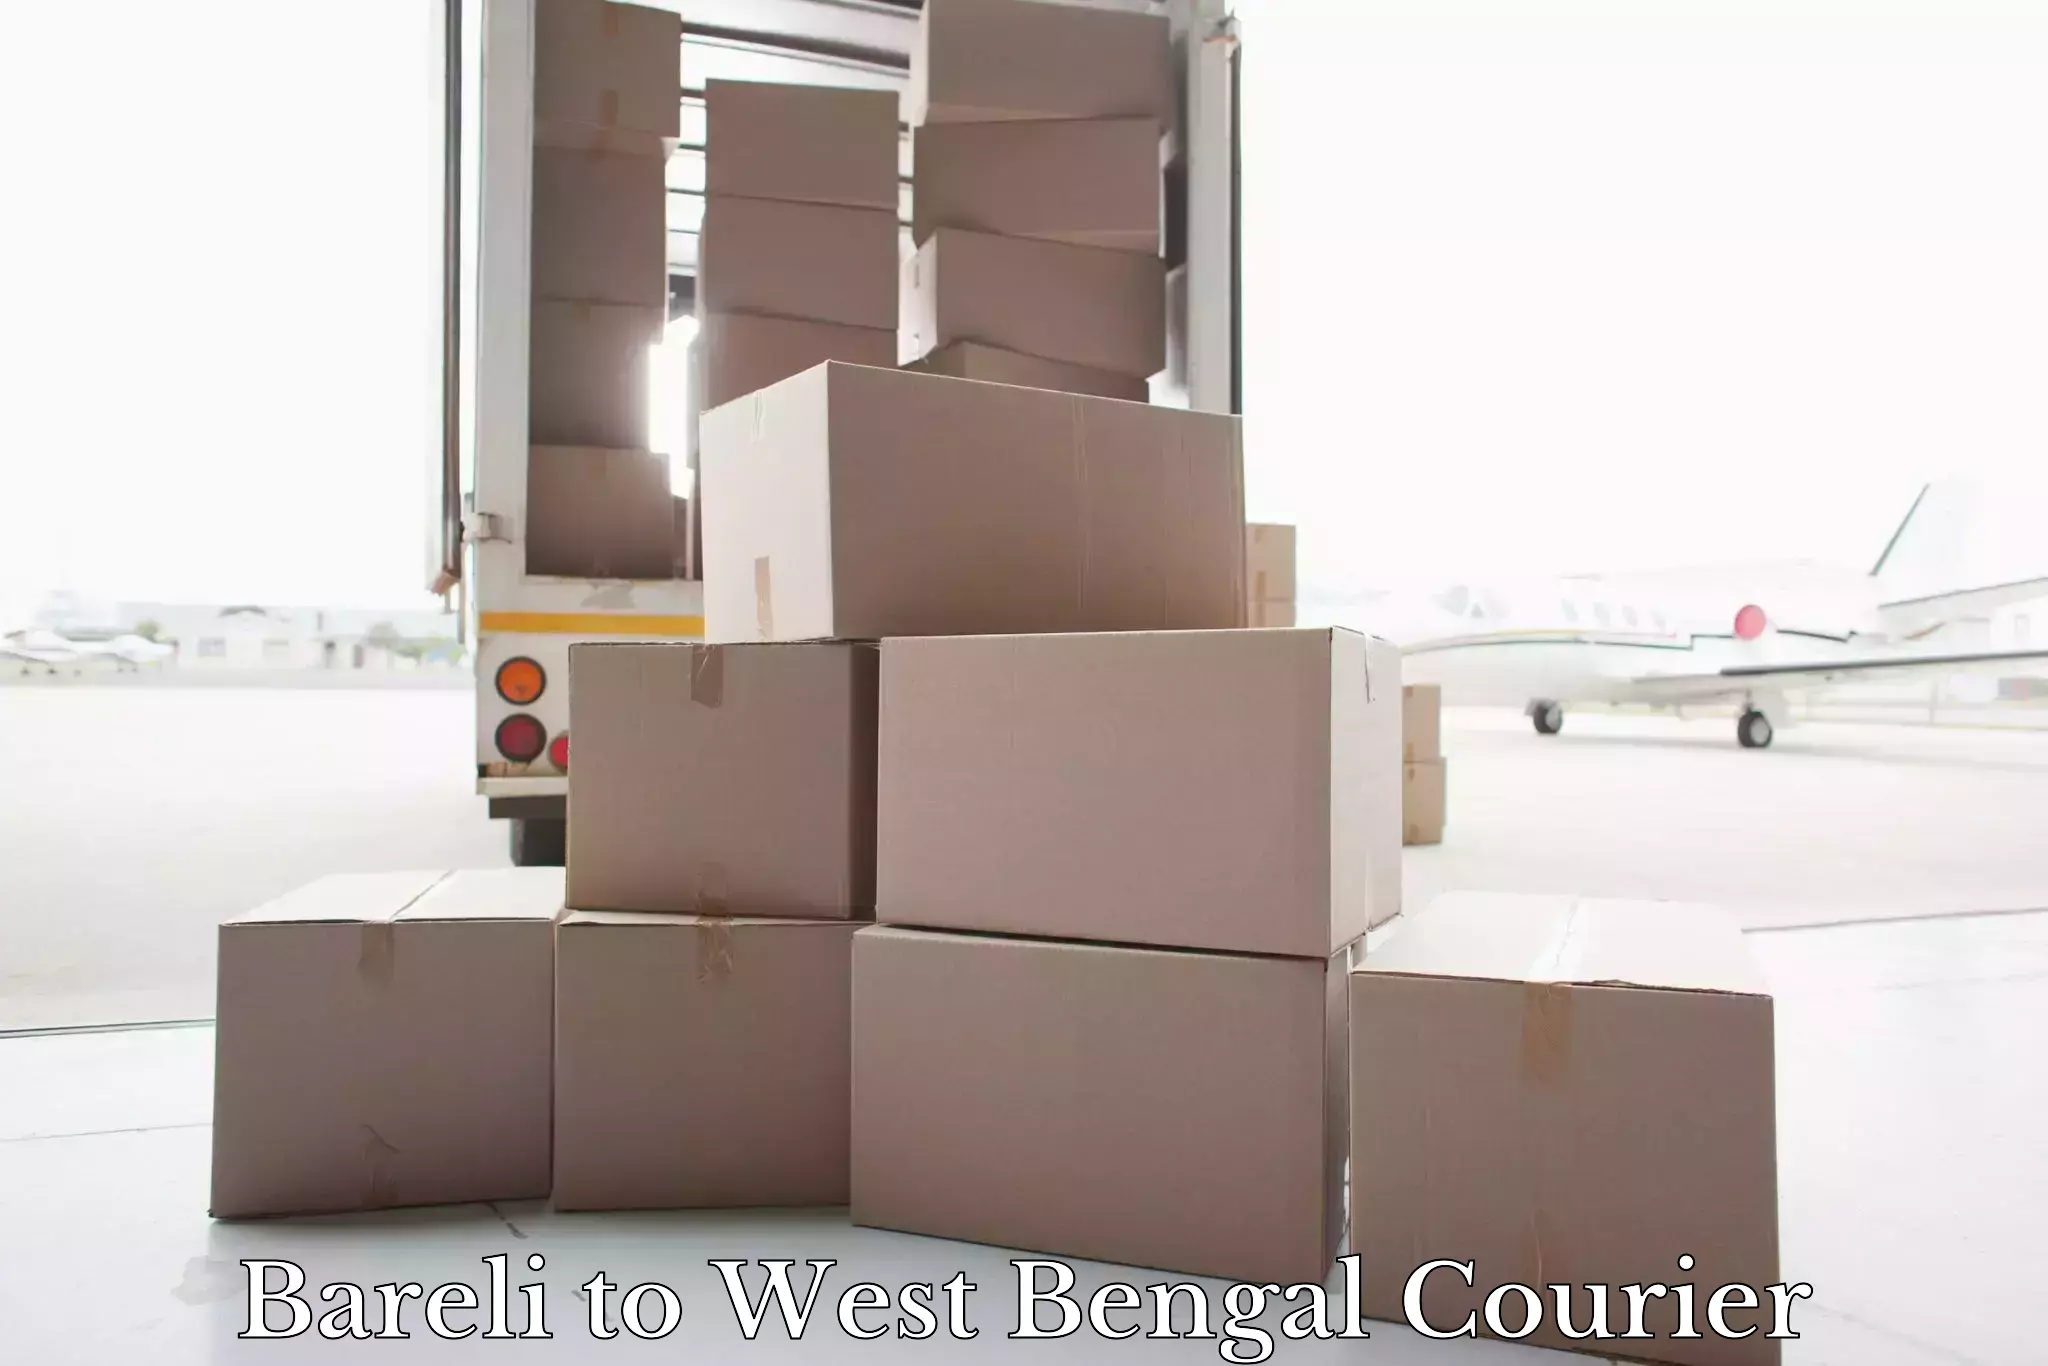 Luggage shipment specialists Bareli to West Bengal